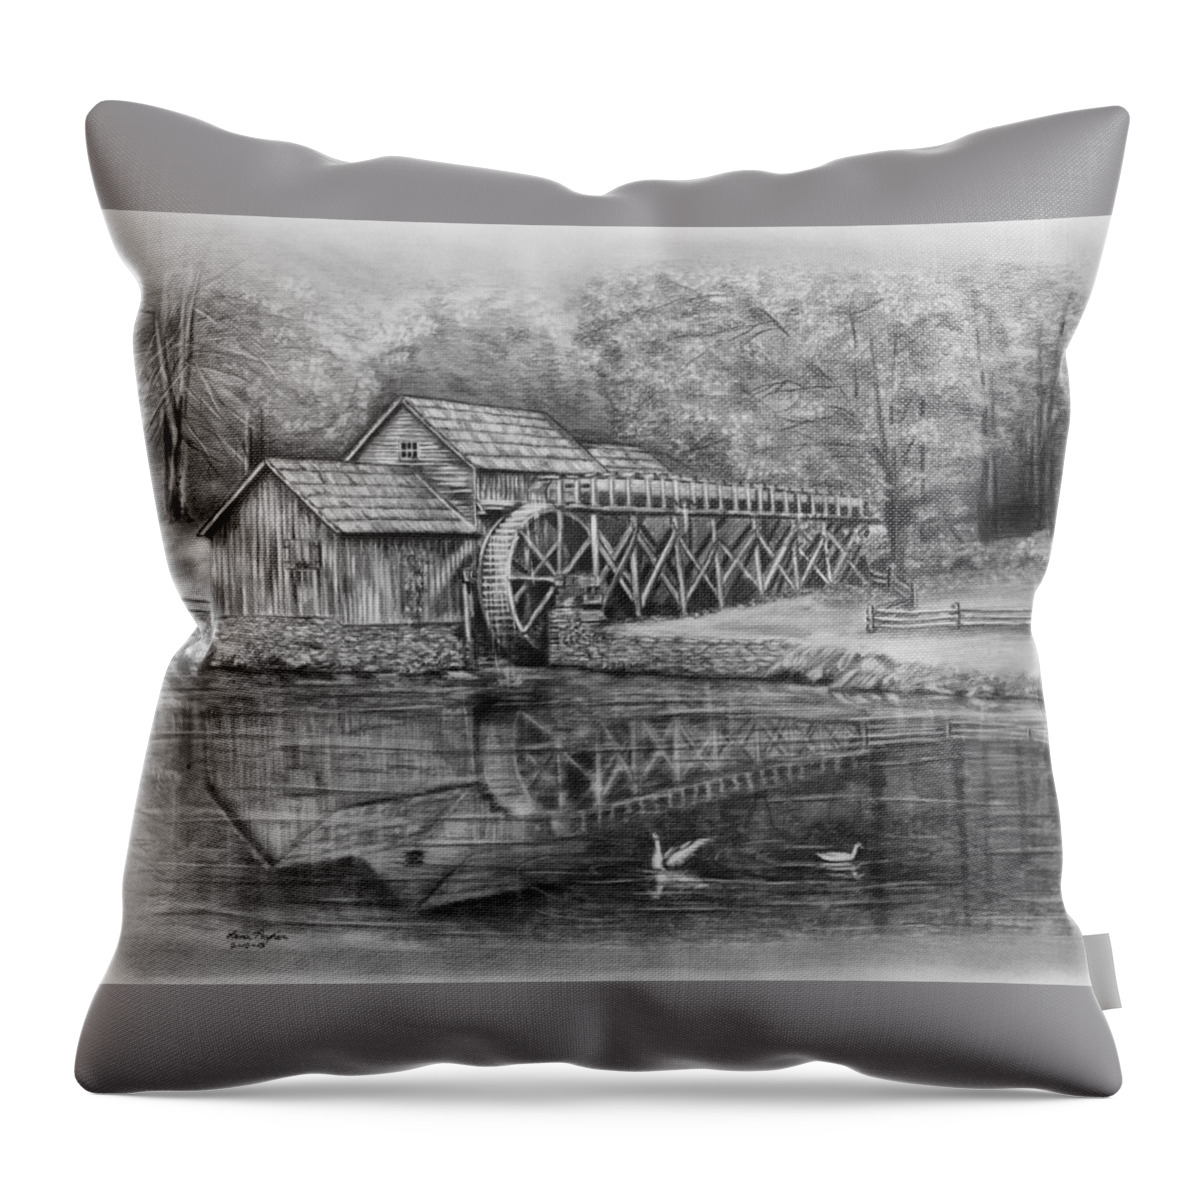 Pencil Throw Pillow featuring the drawing Mabry Mill Pencil Drawing by Lena Auxier